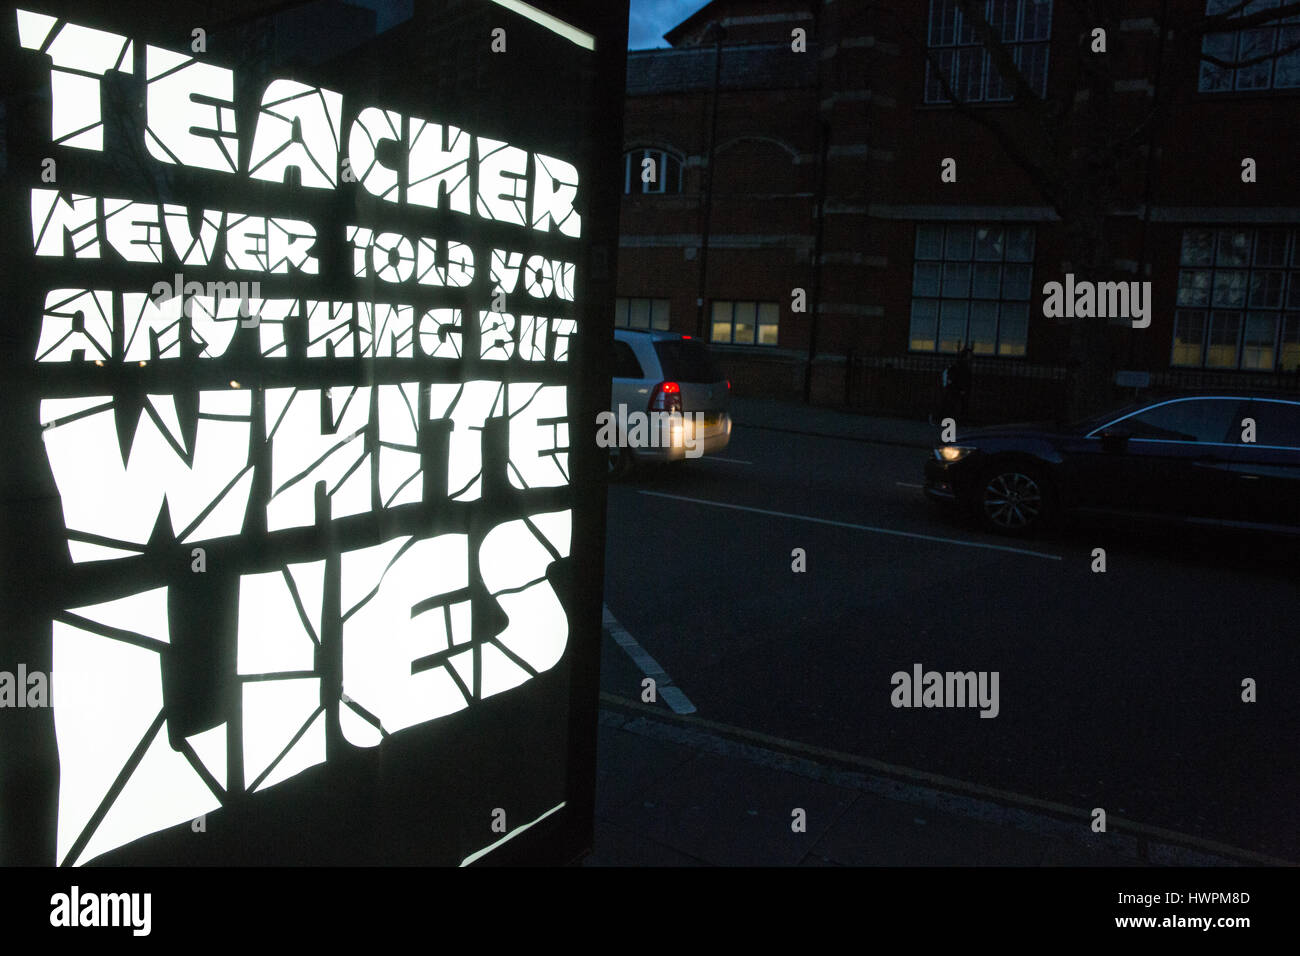 London, UK. 21st March, 2017. A protest stencil on a street in Finsbury reads 'Teacher Never Told You Anything But White Lies'. A global event named #SubvertTheCity is taking place between 22nd-25th March 2017. Credit: Mark Kerrison/Alamy Live News Stock Photo